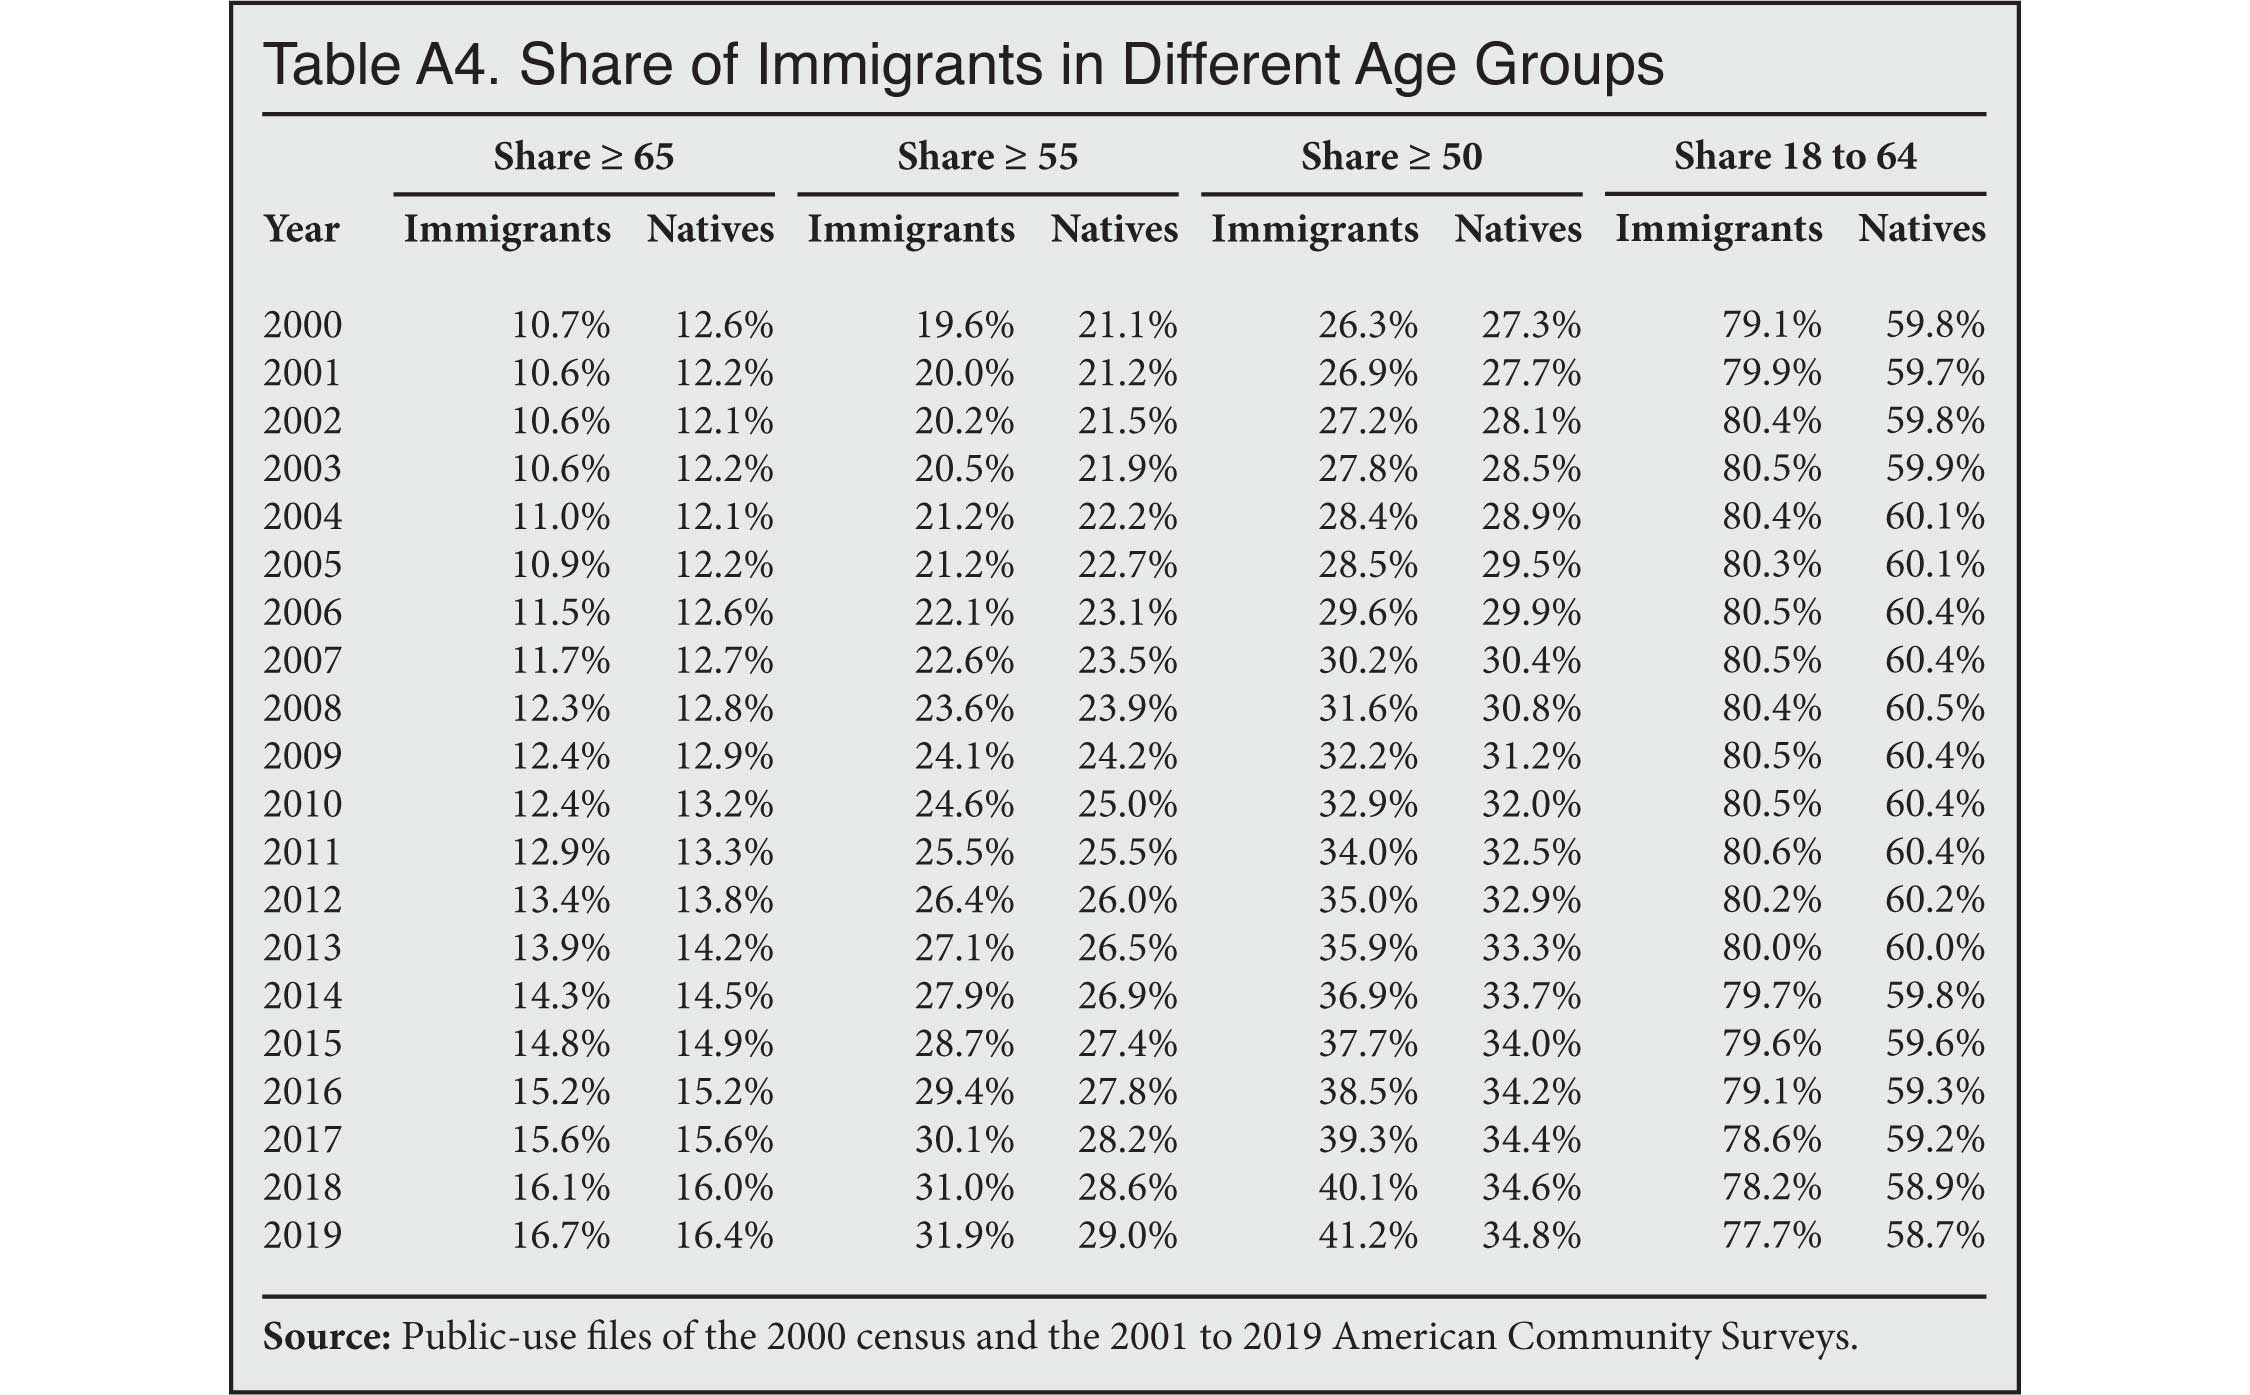 Table: Share of immigrants in different age groups